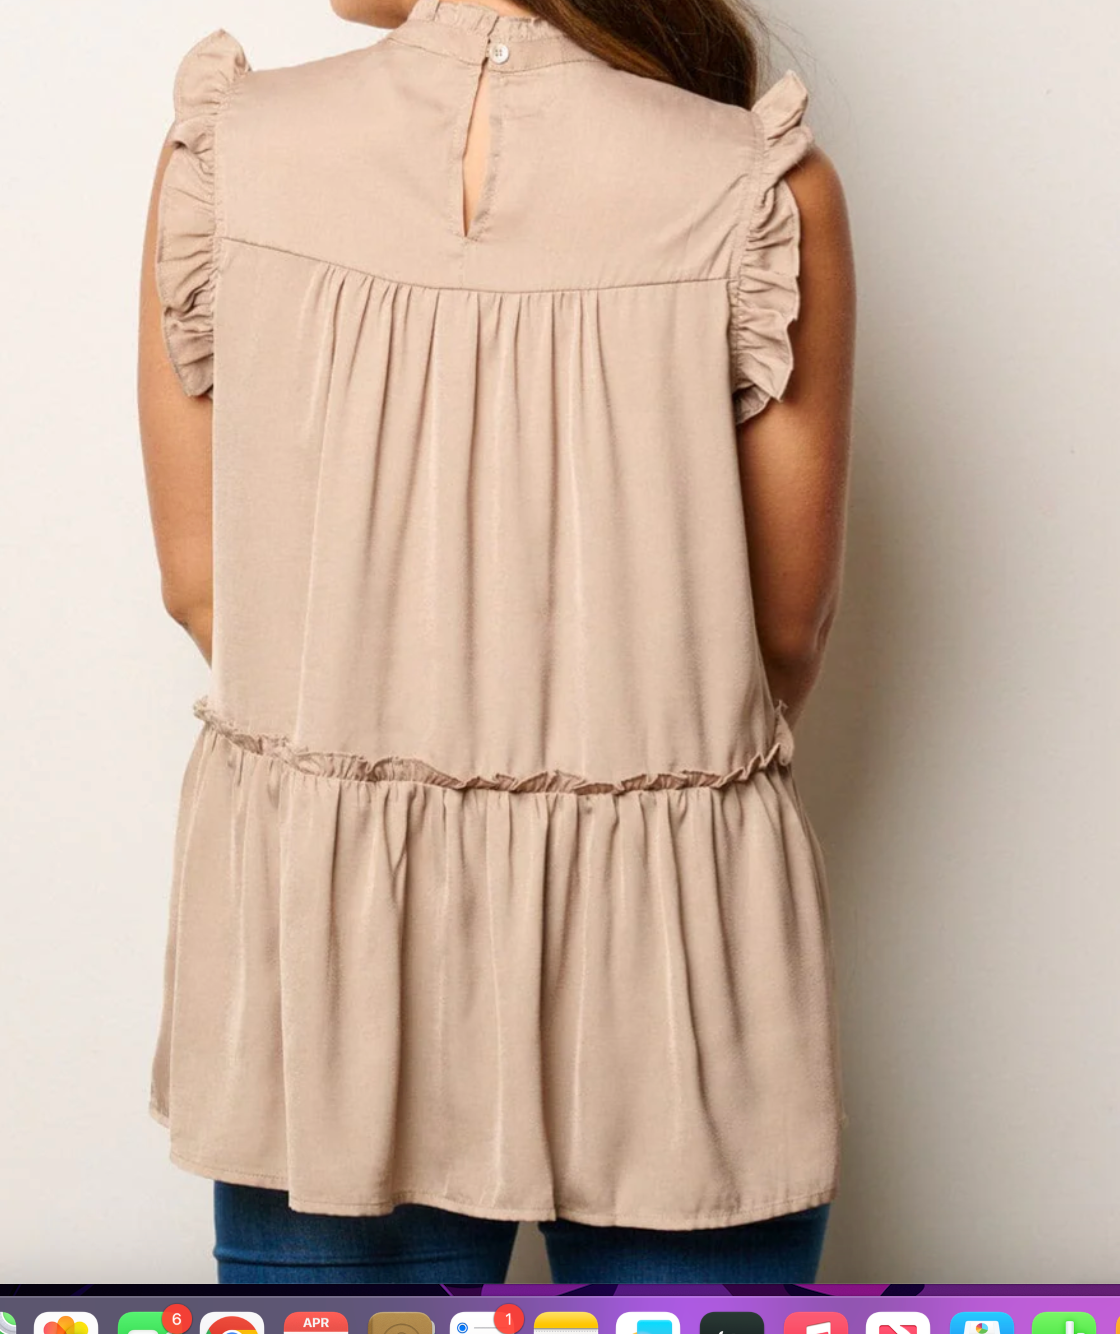 Effortless Elegance: Sleeveless Ruffle Tiered Mock Neck Tunic Top in Taupe